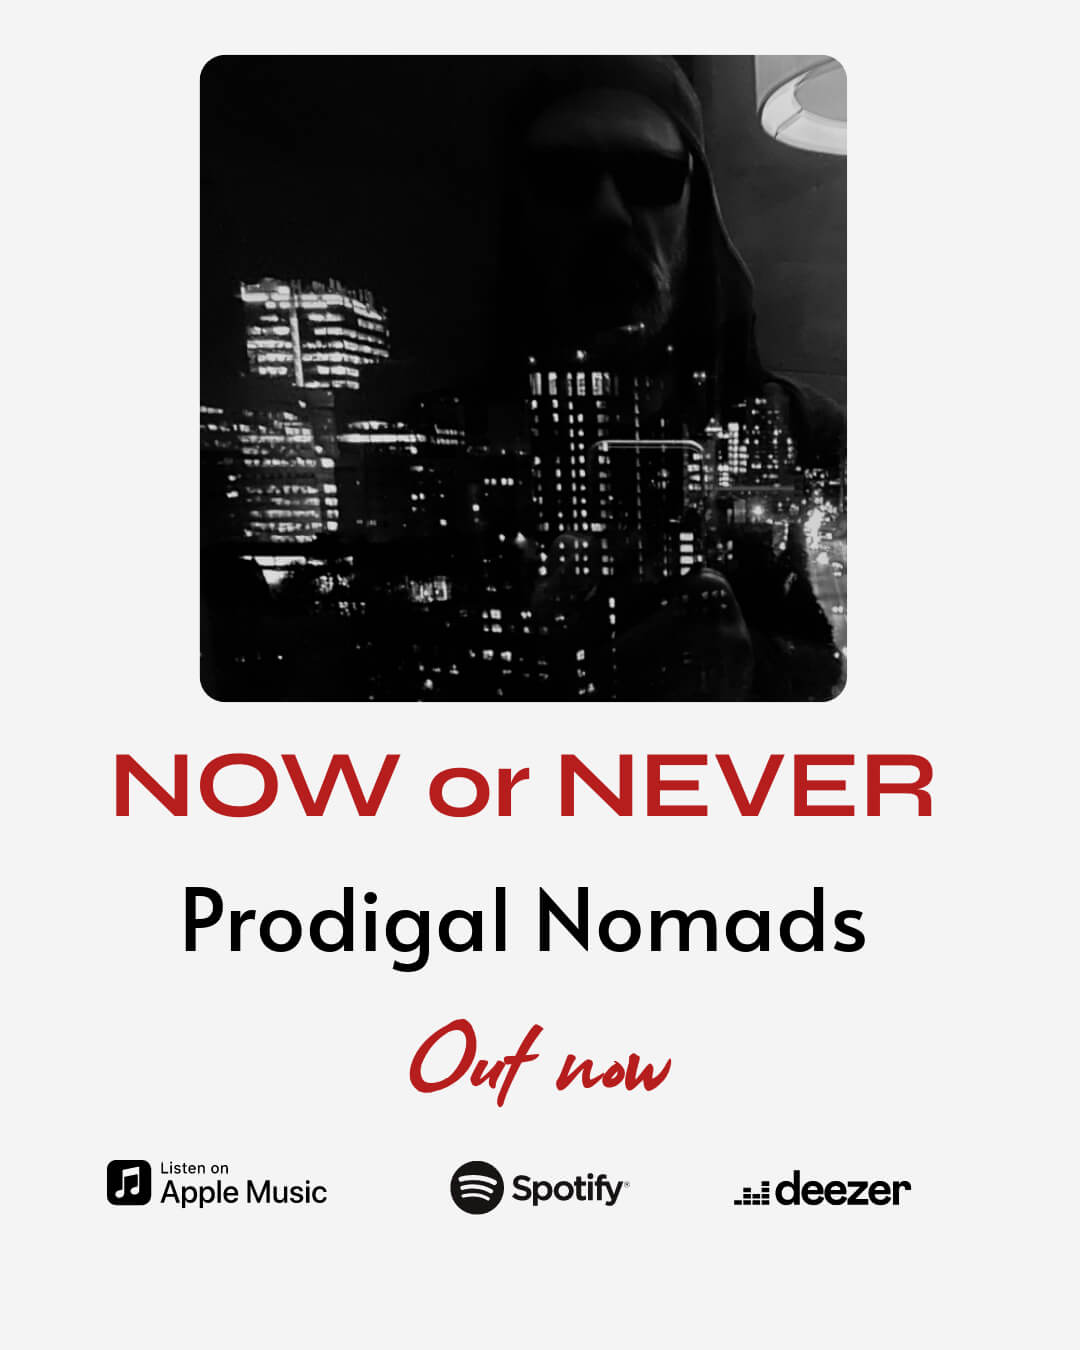 now or never release post